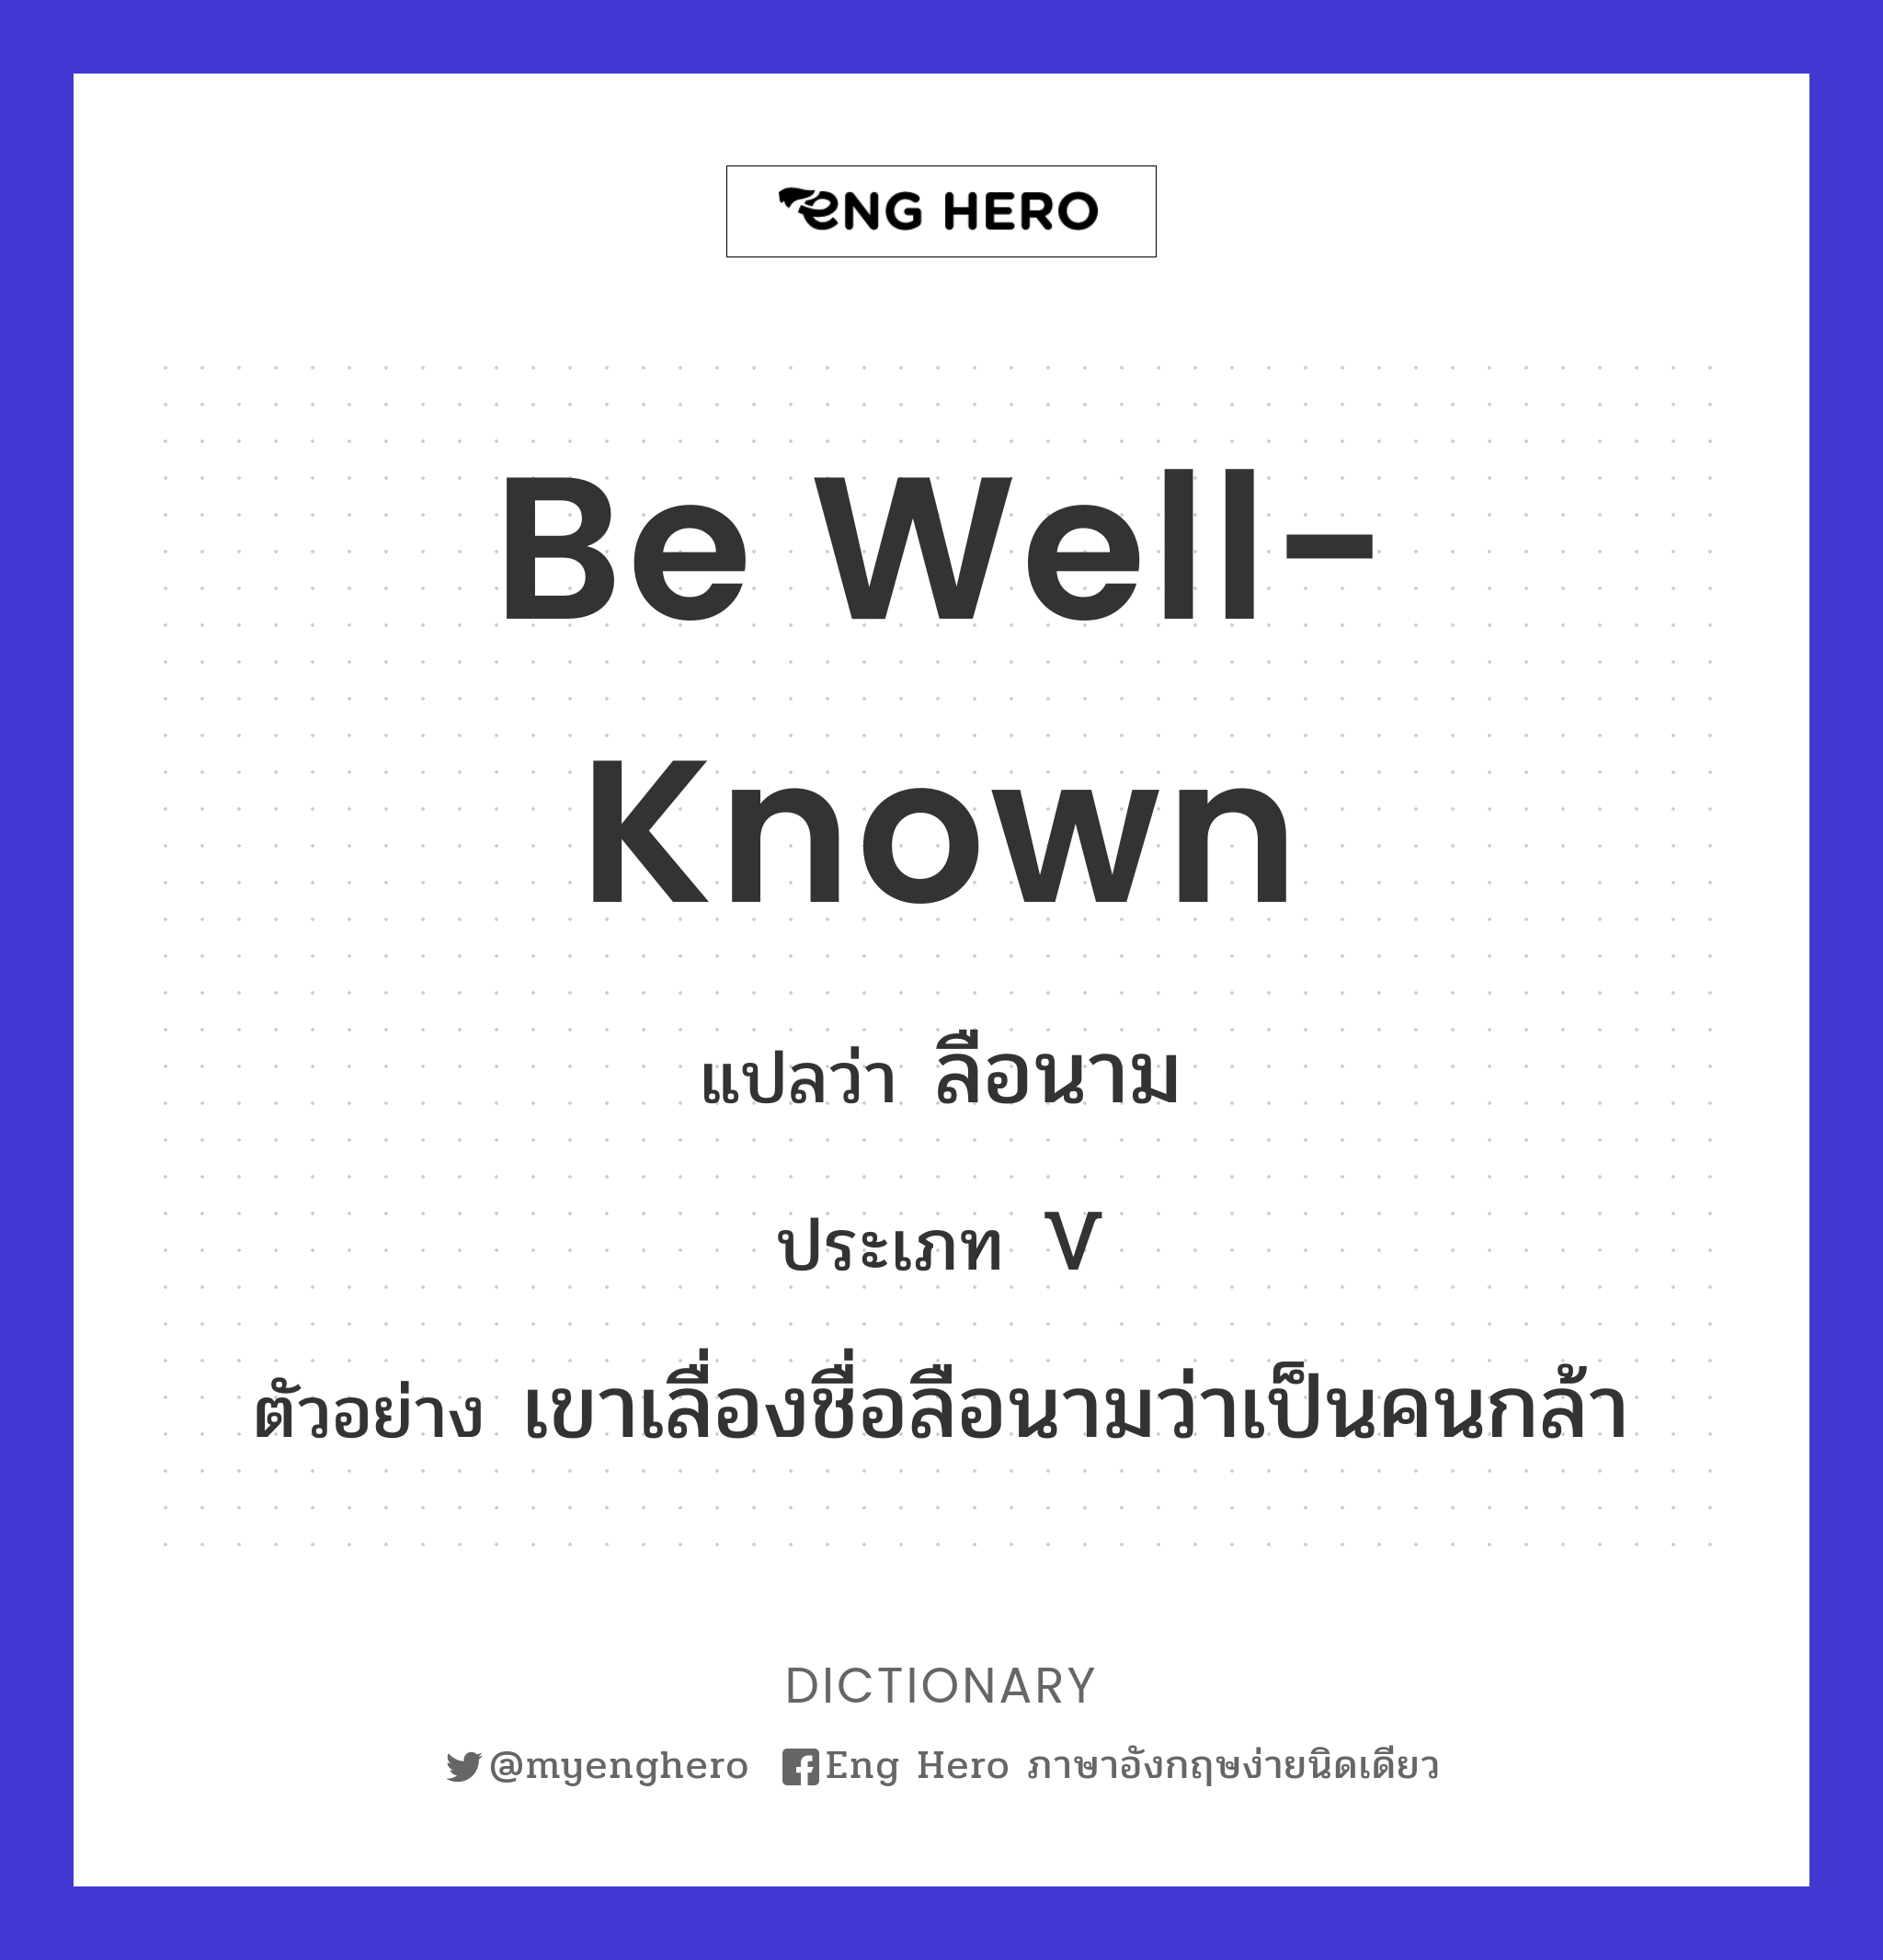 be well-known